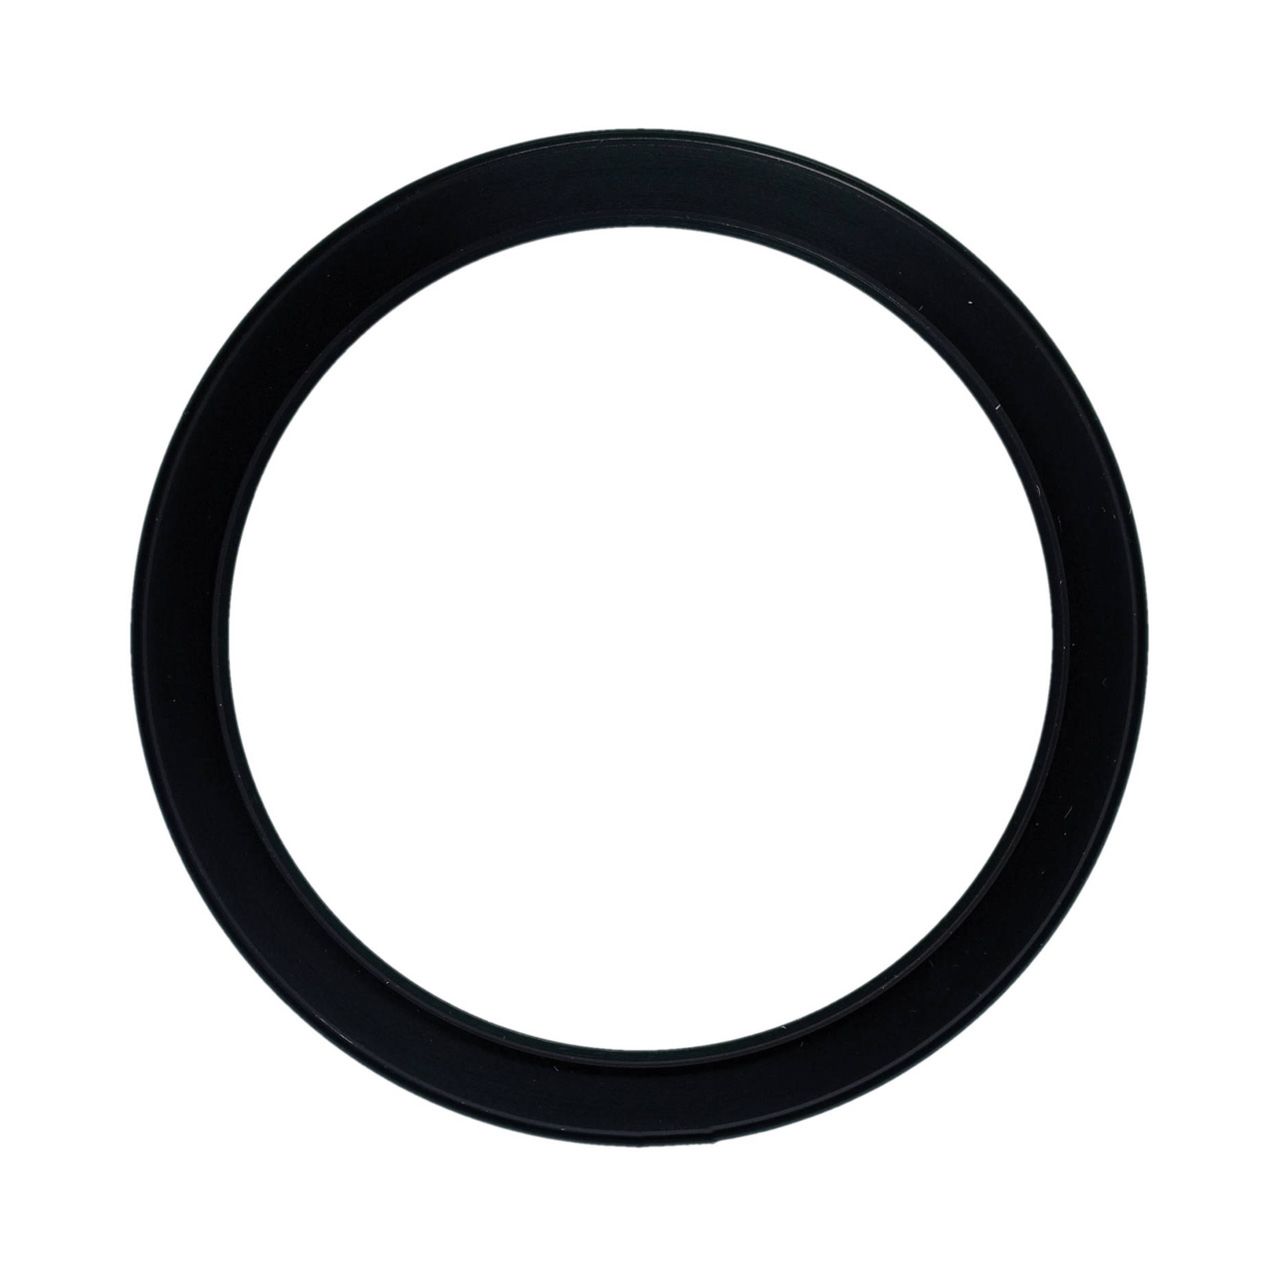 LEE Filters Seven5 Adapter Ring 62Mm